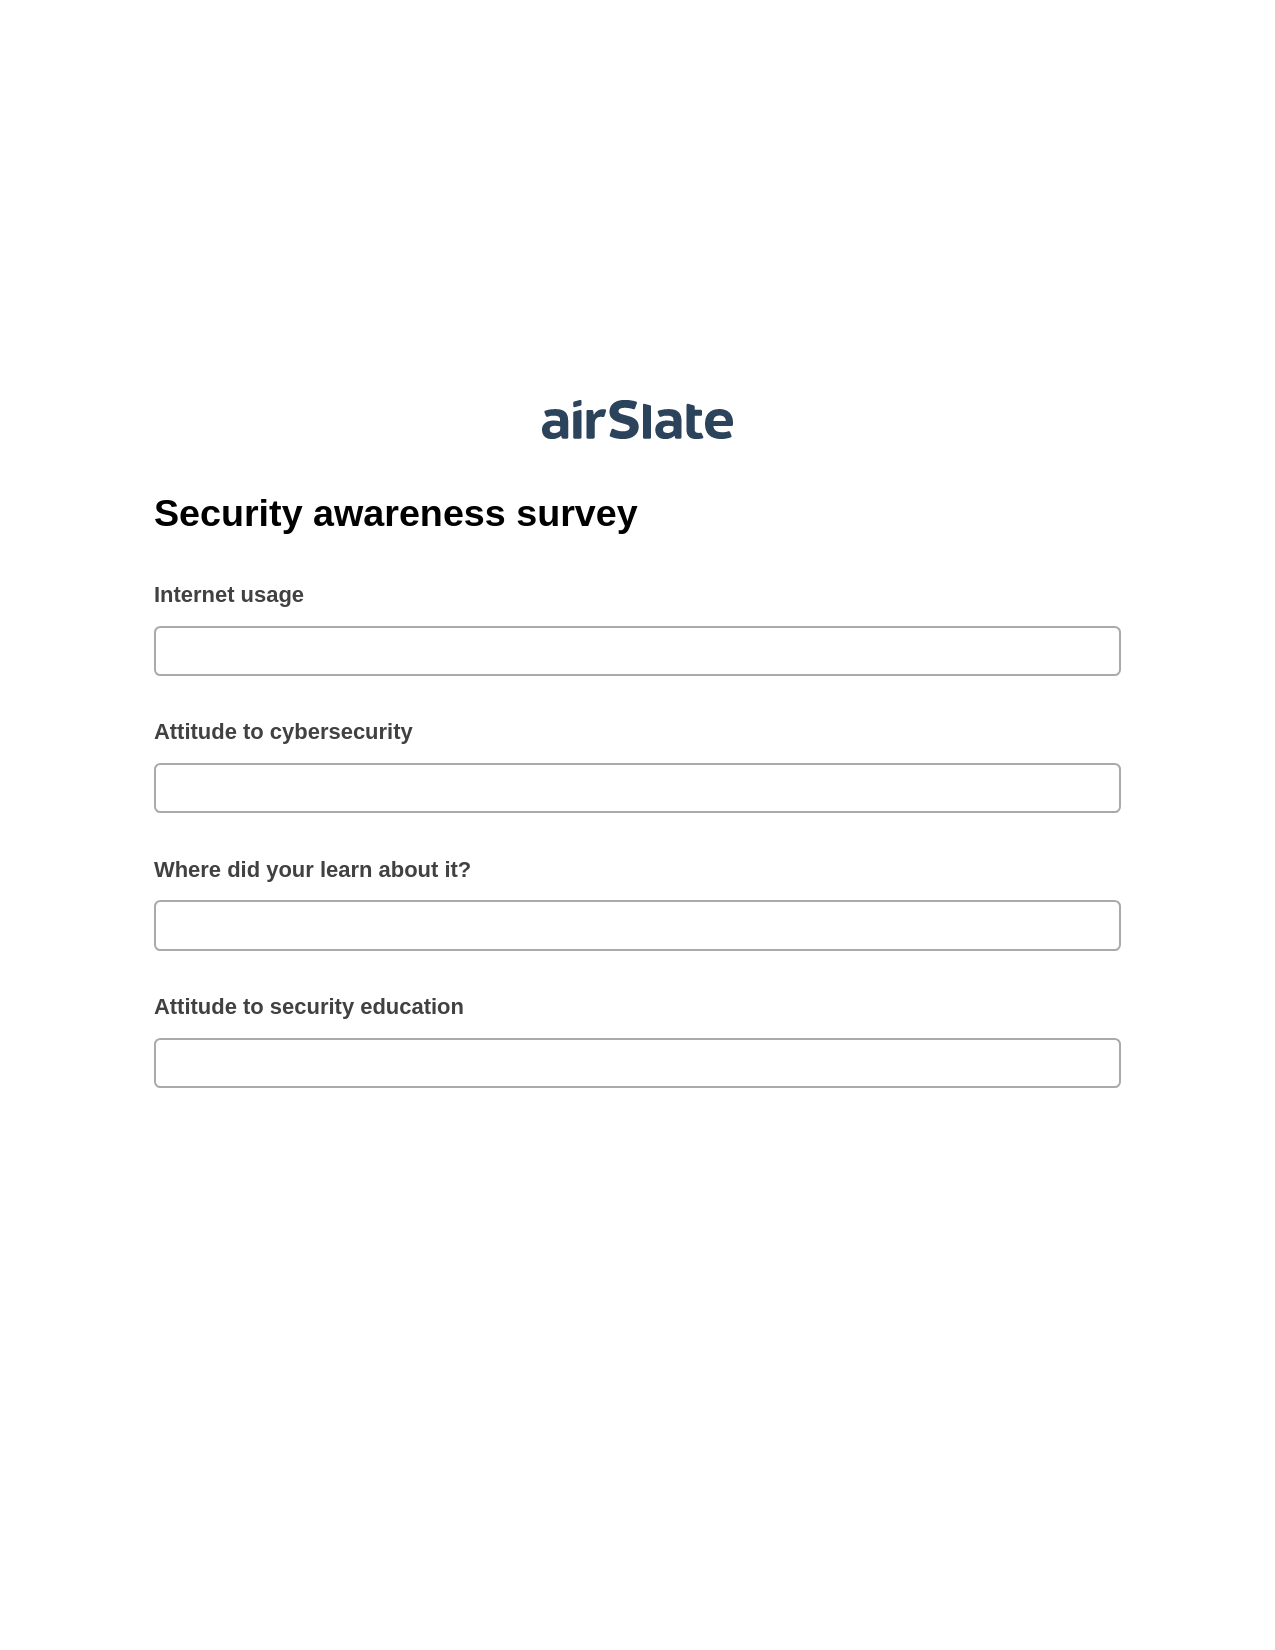 Security awareness survey Pre-fill from CSV File Bot, Mailchimp send Campaign bot, Export to Formstack Documents Bot